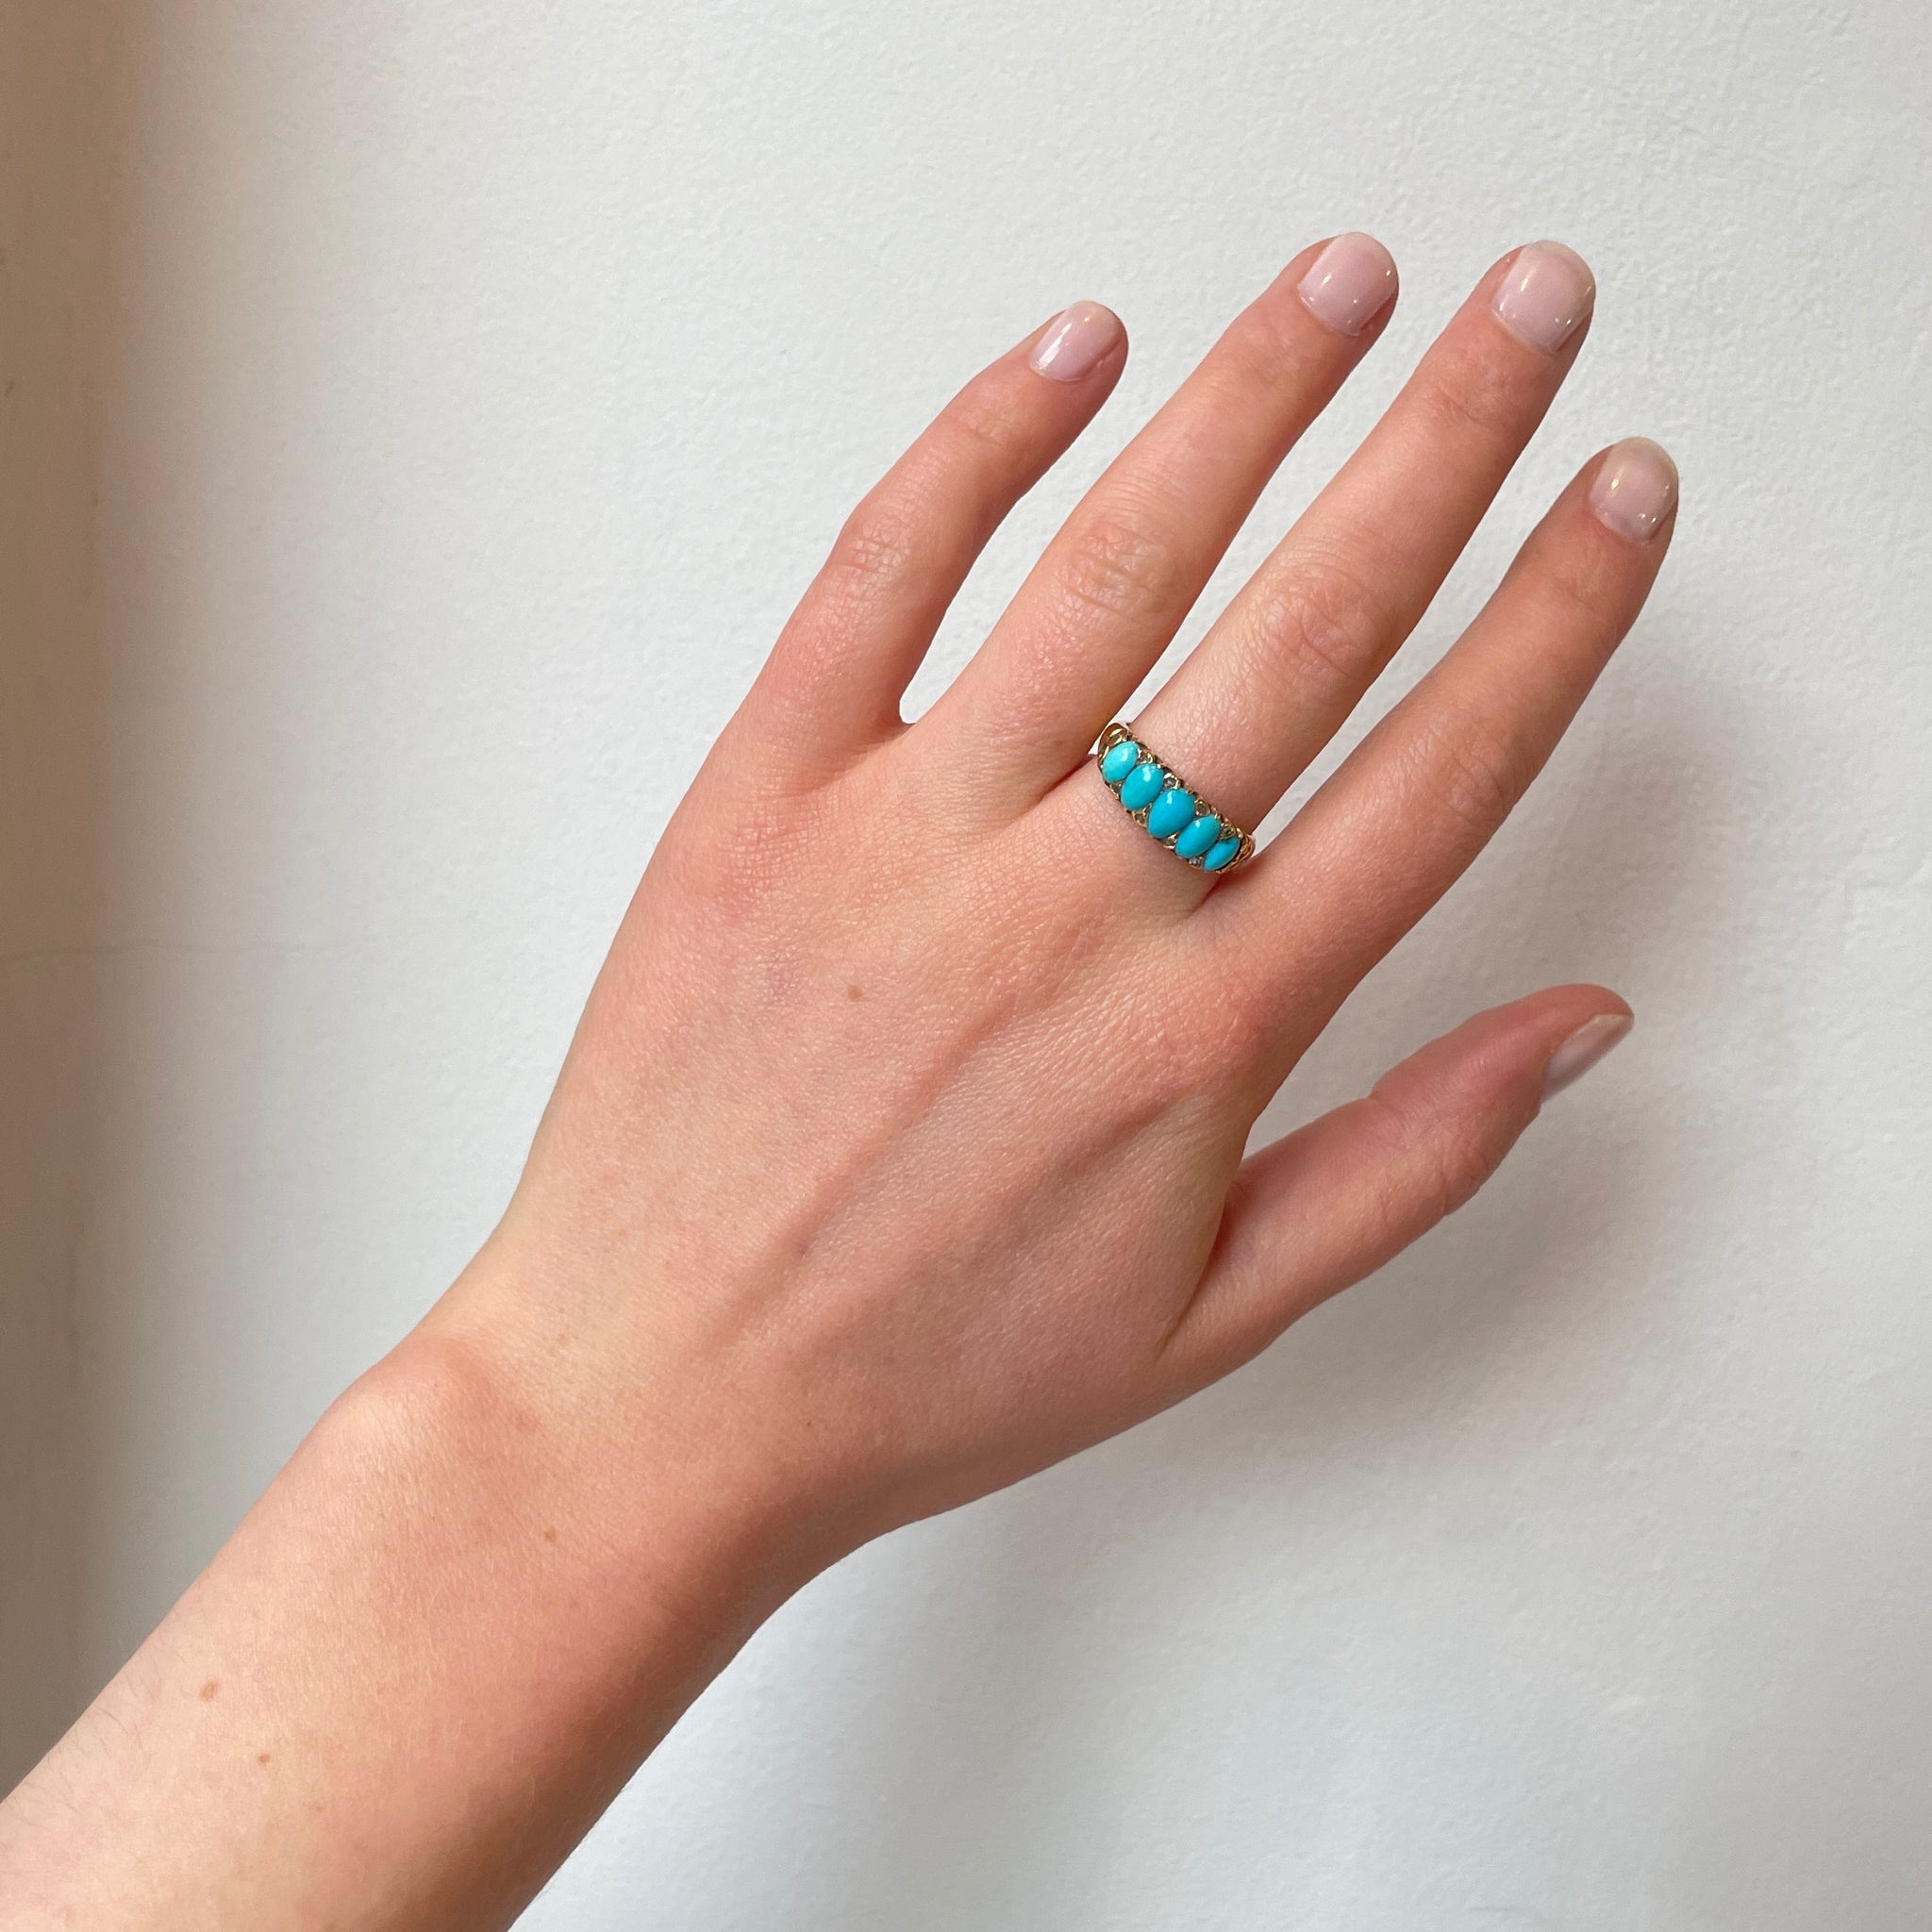 Victorian Turquoise 5 Stone Ring